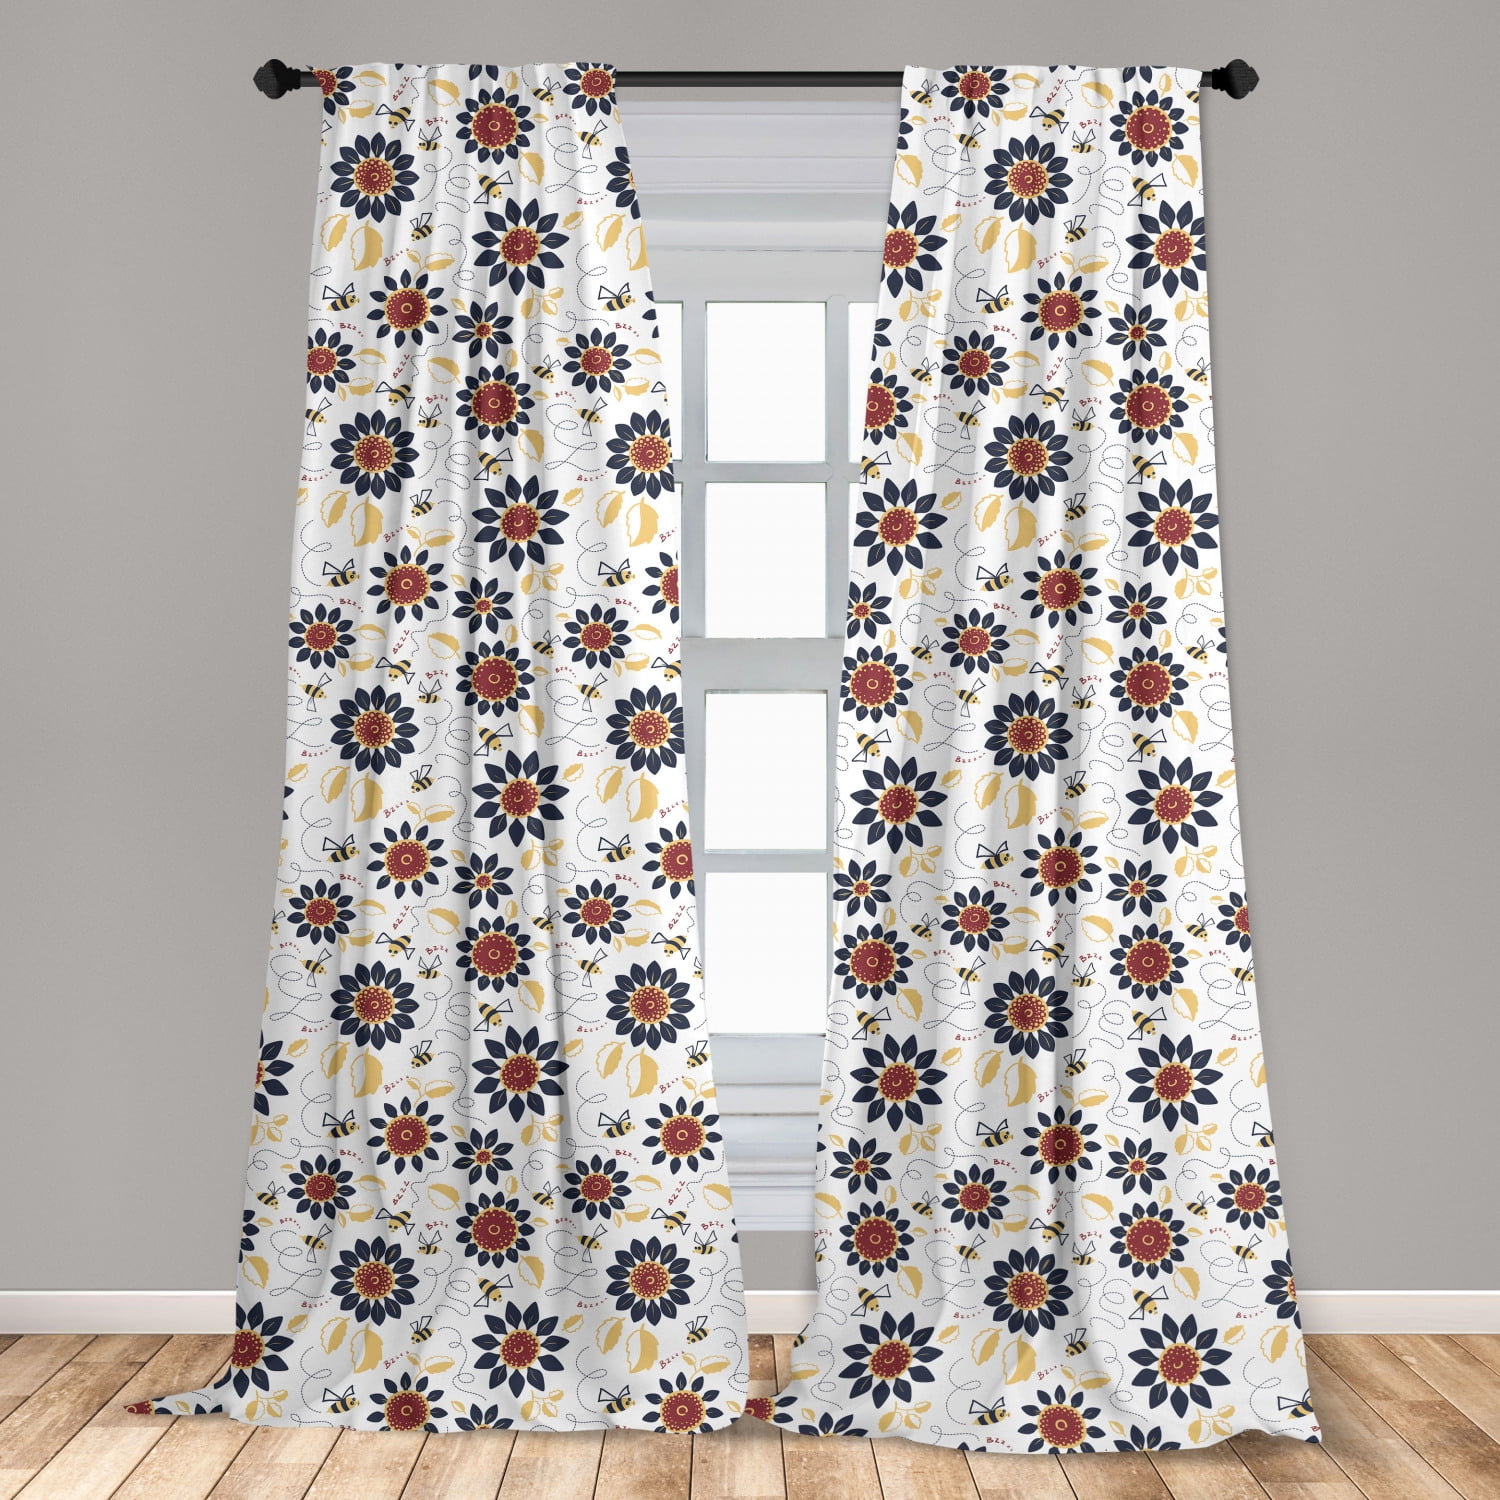 Sunflower Pattern Boho Curtains For Living Room Bedroom Window Treatment Drapes 